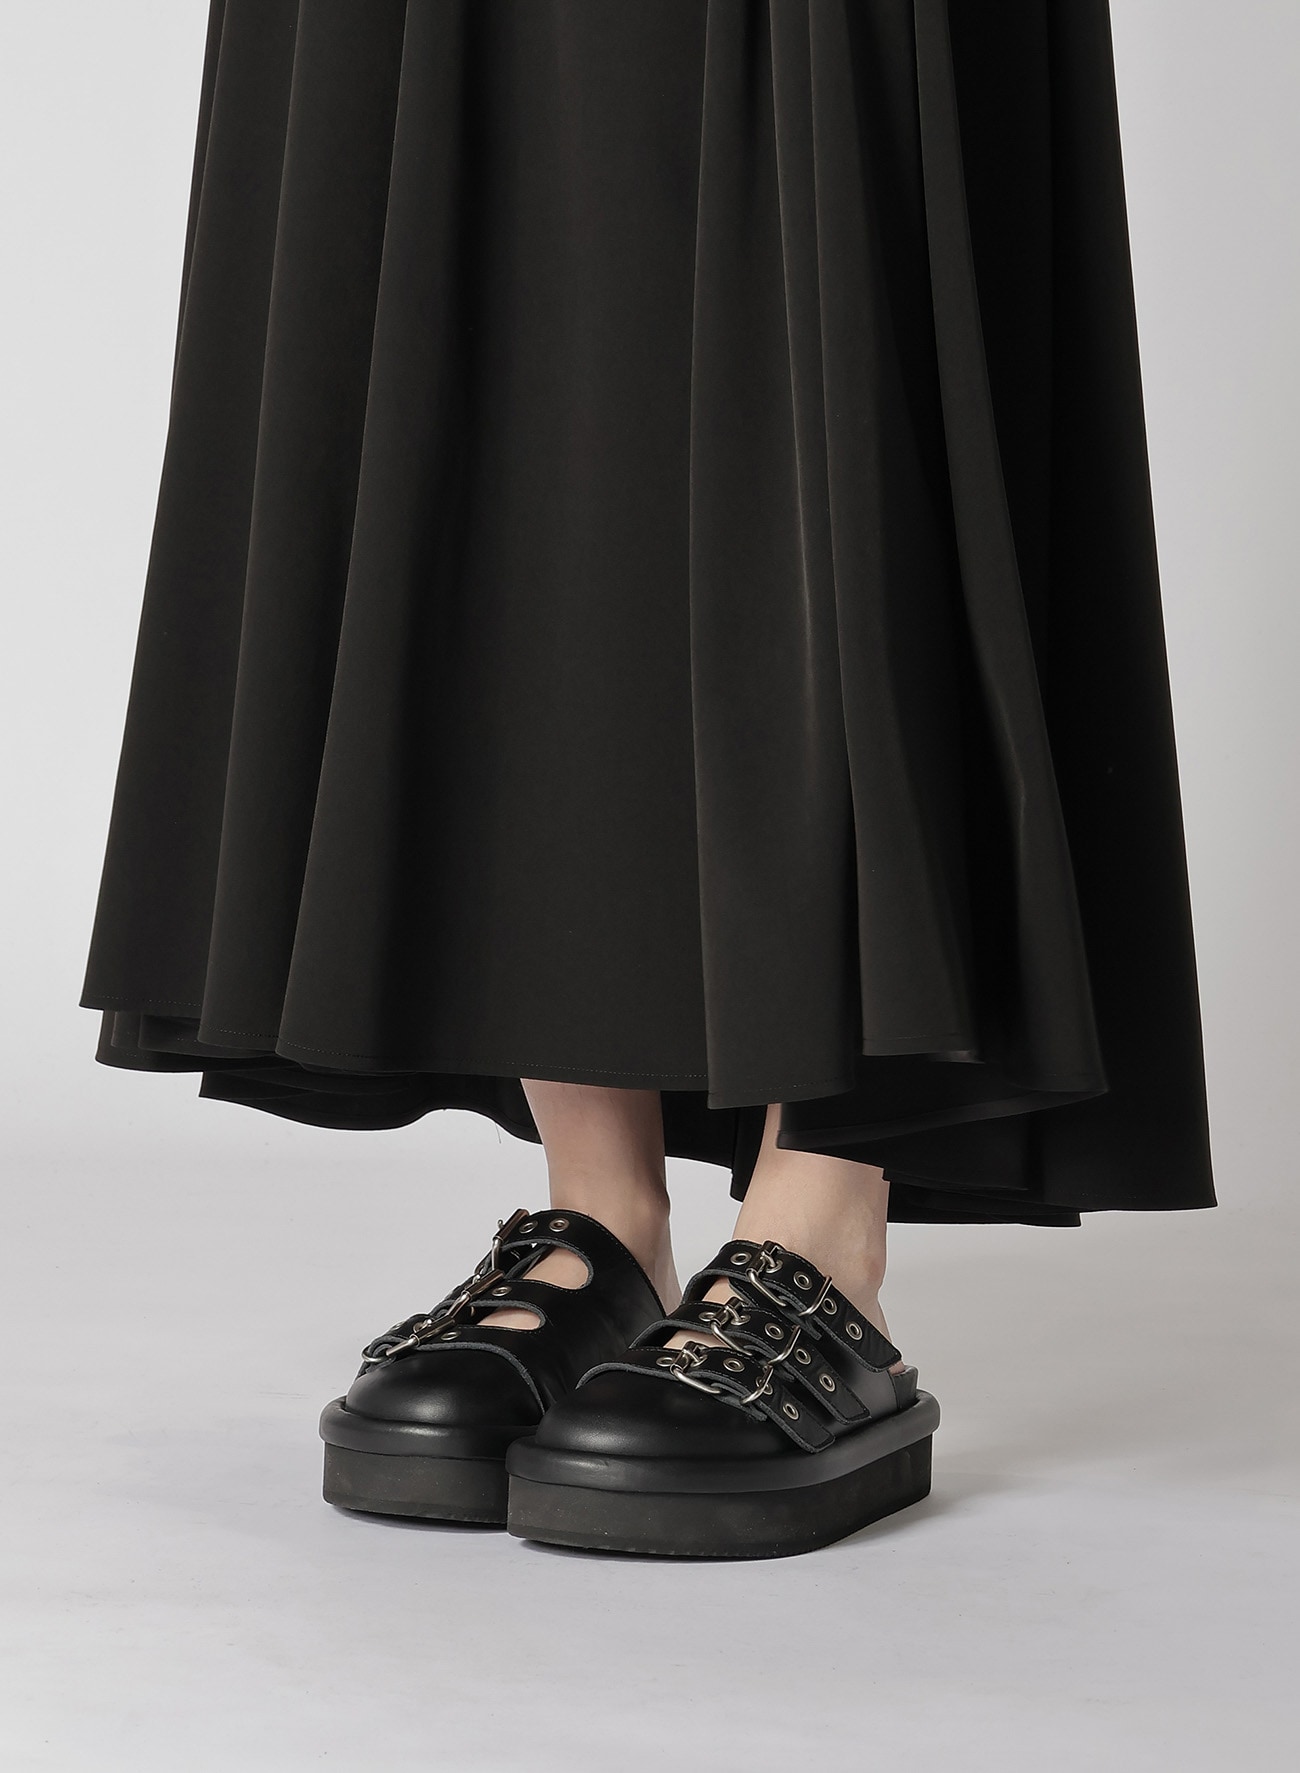 【8/7 12:00(JST) Release】TRIACETATE/POLYESTER SKIRT